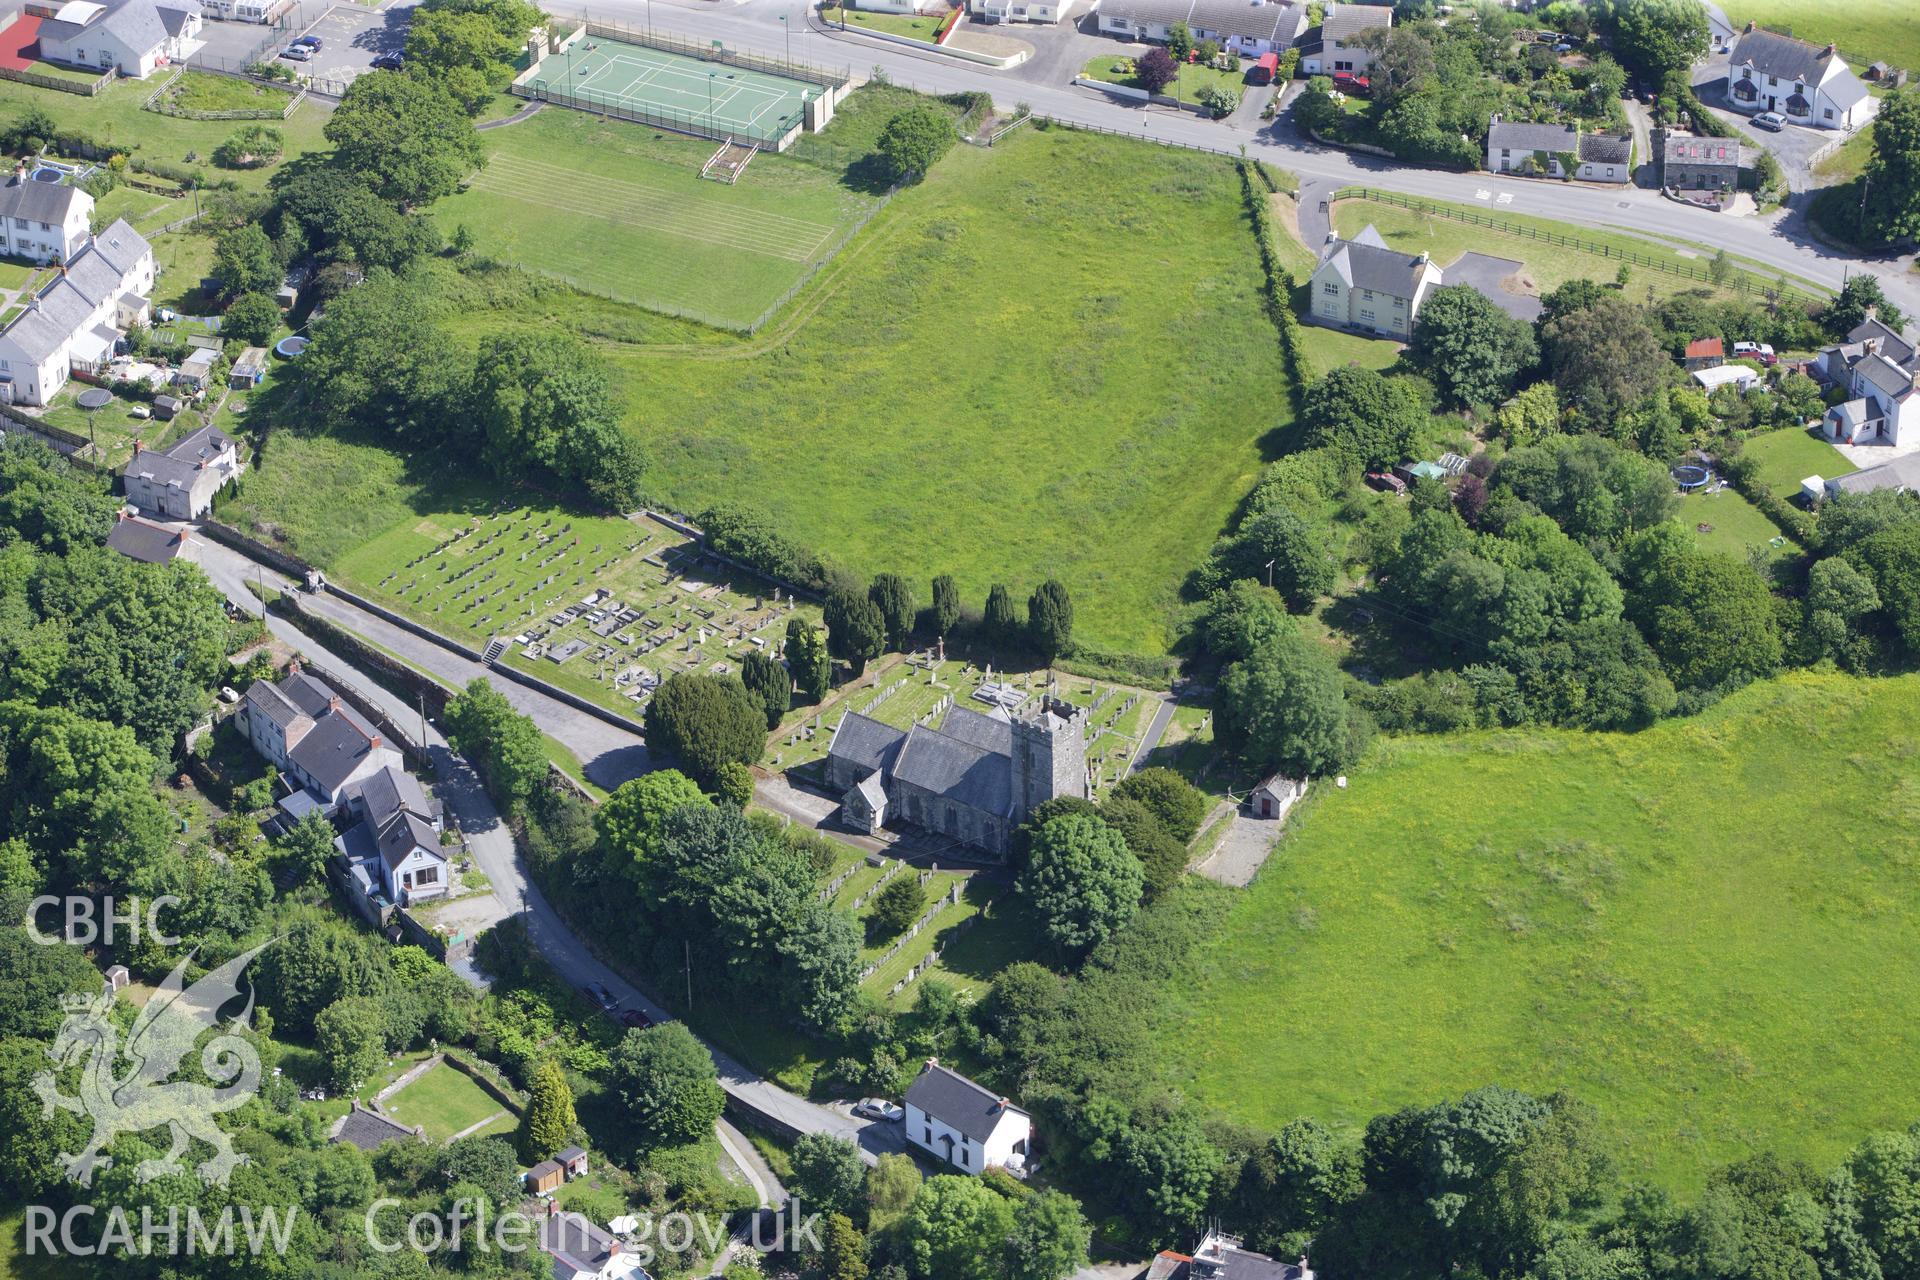 RCAHMW colour oblique aerial photograph of St. Llawdog's churchyard, Cilgerran. Taken on 16 June 2009 by Toby Driver